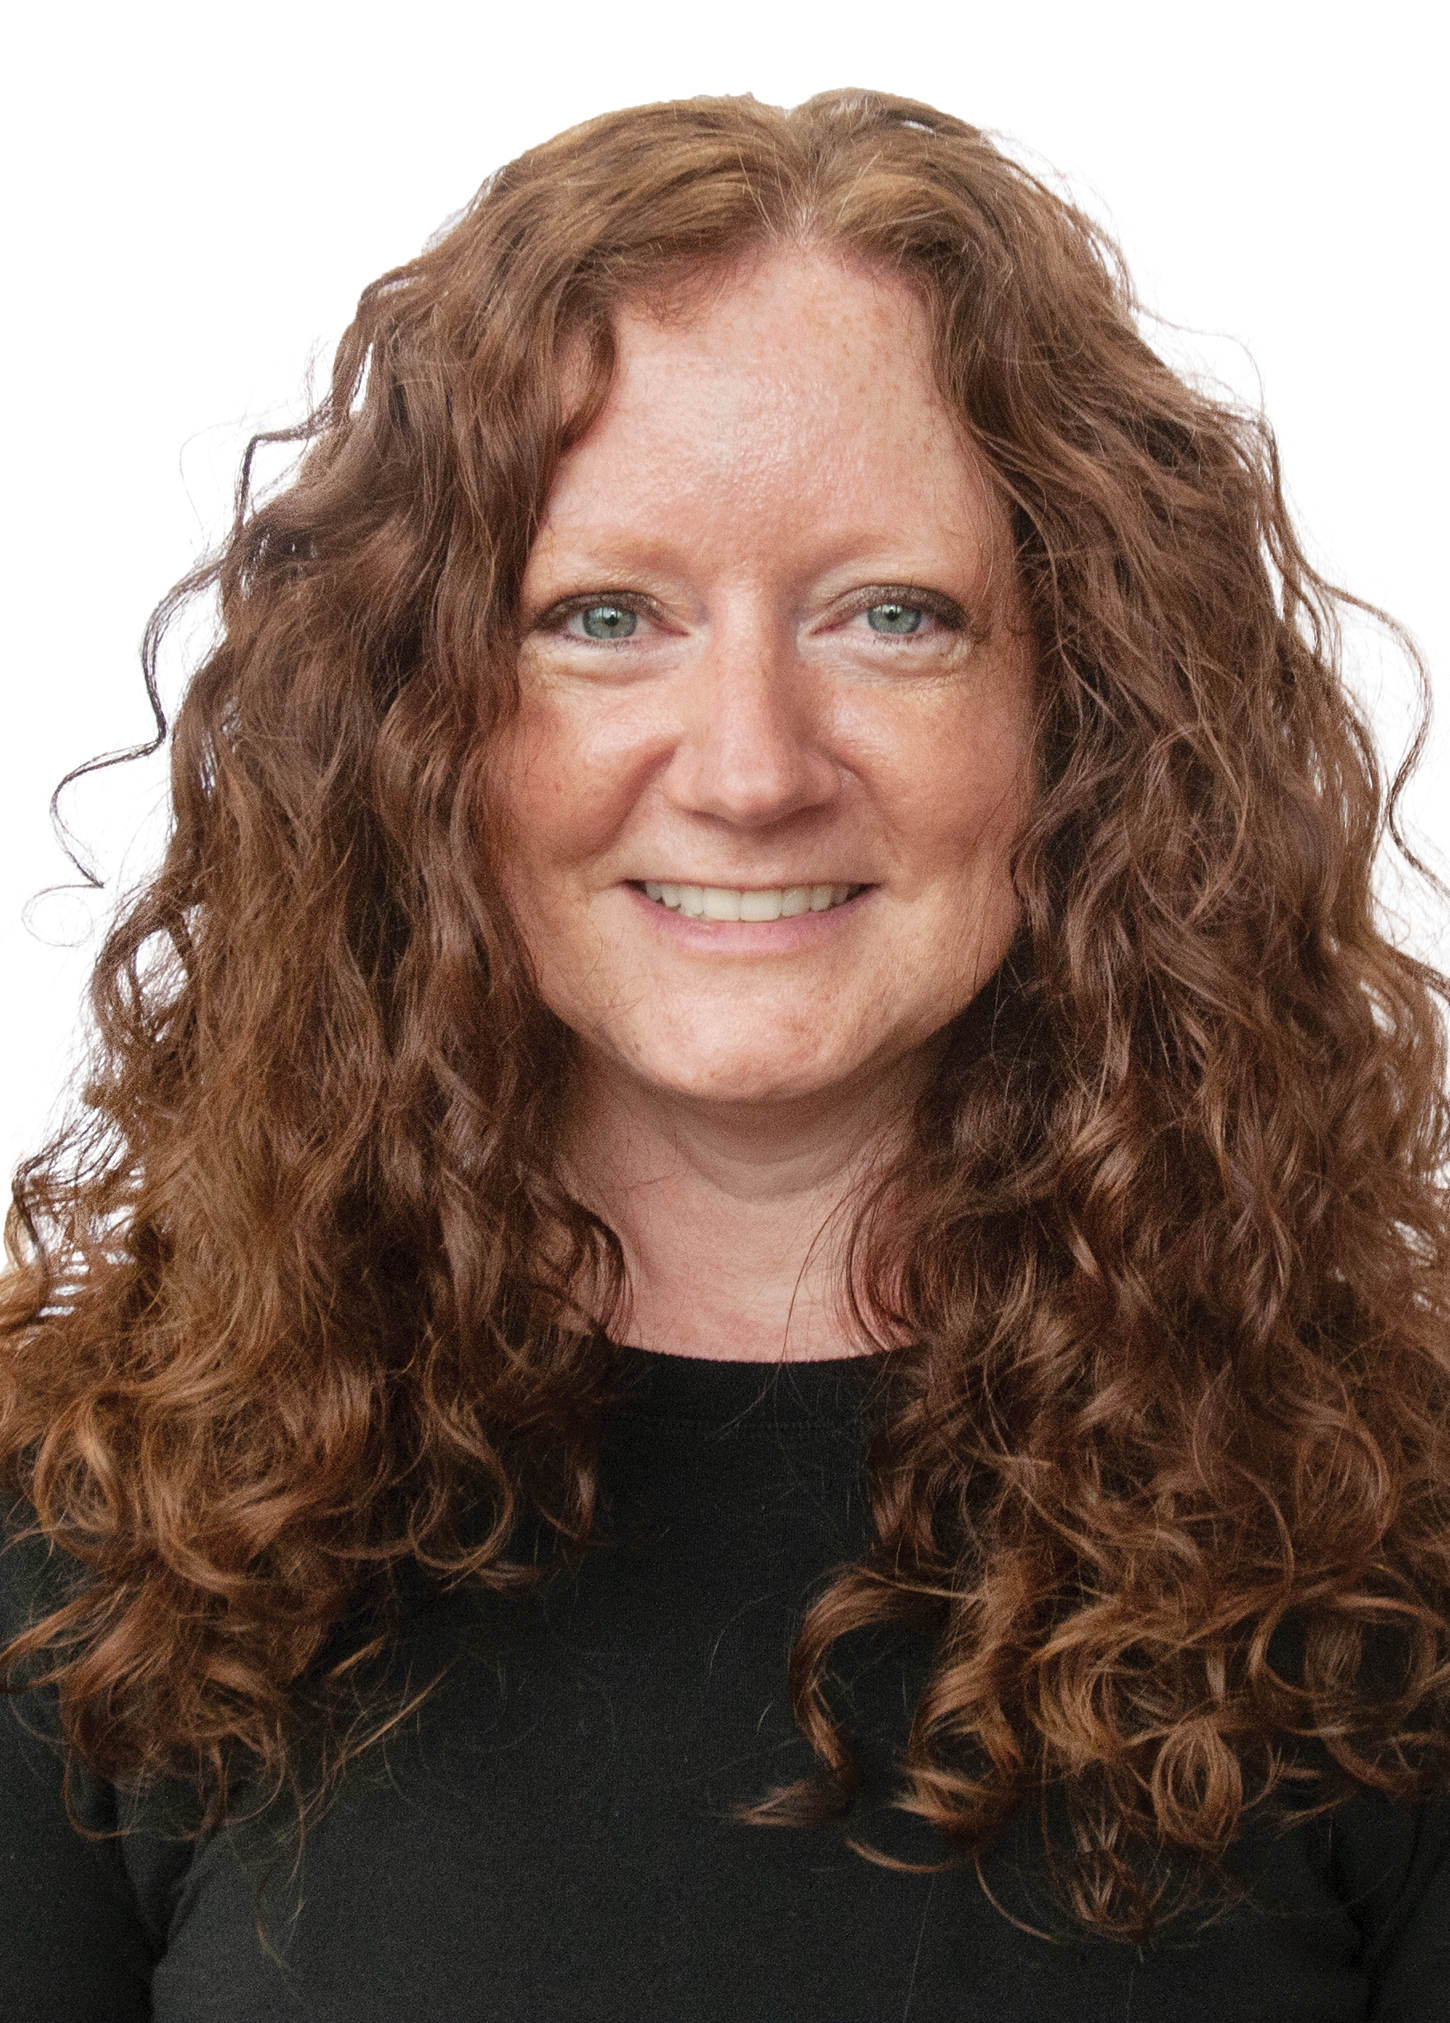 a headshot of woman with long red curly hair and green eyes. she is wearing a black shirt.